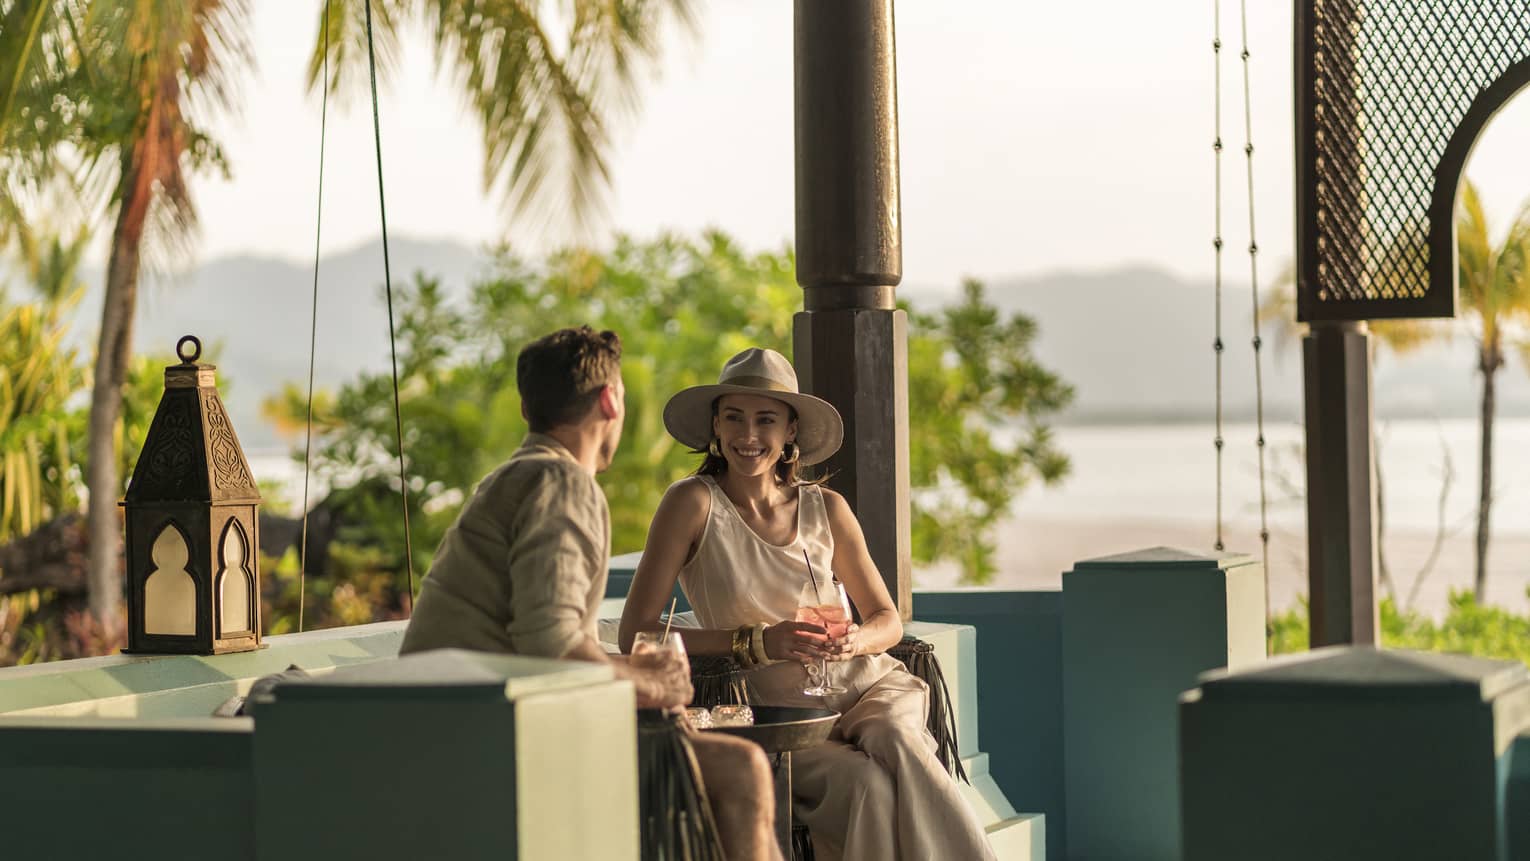 A man and woman are sitting in an outdoor Rhu Bar area overlooking the ocean holding cocktails